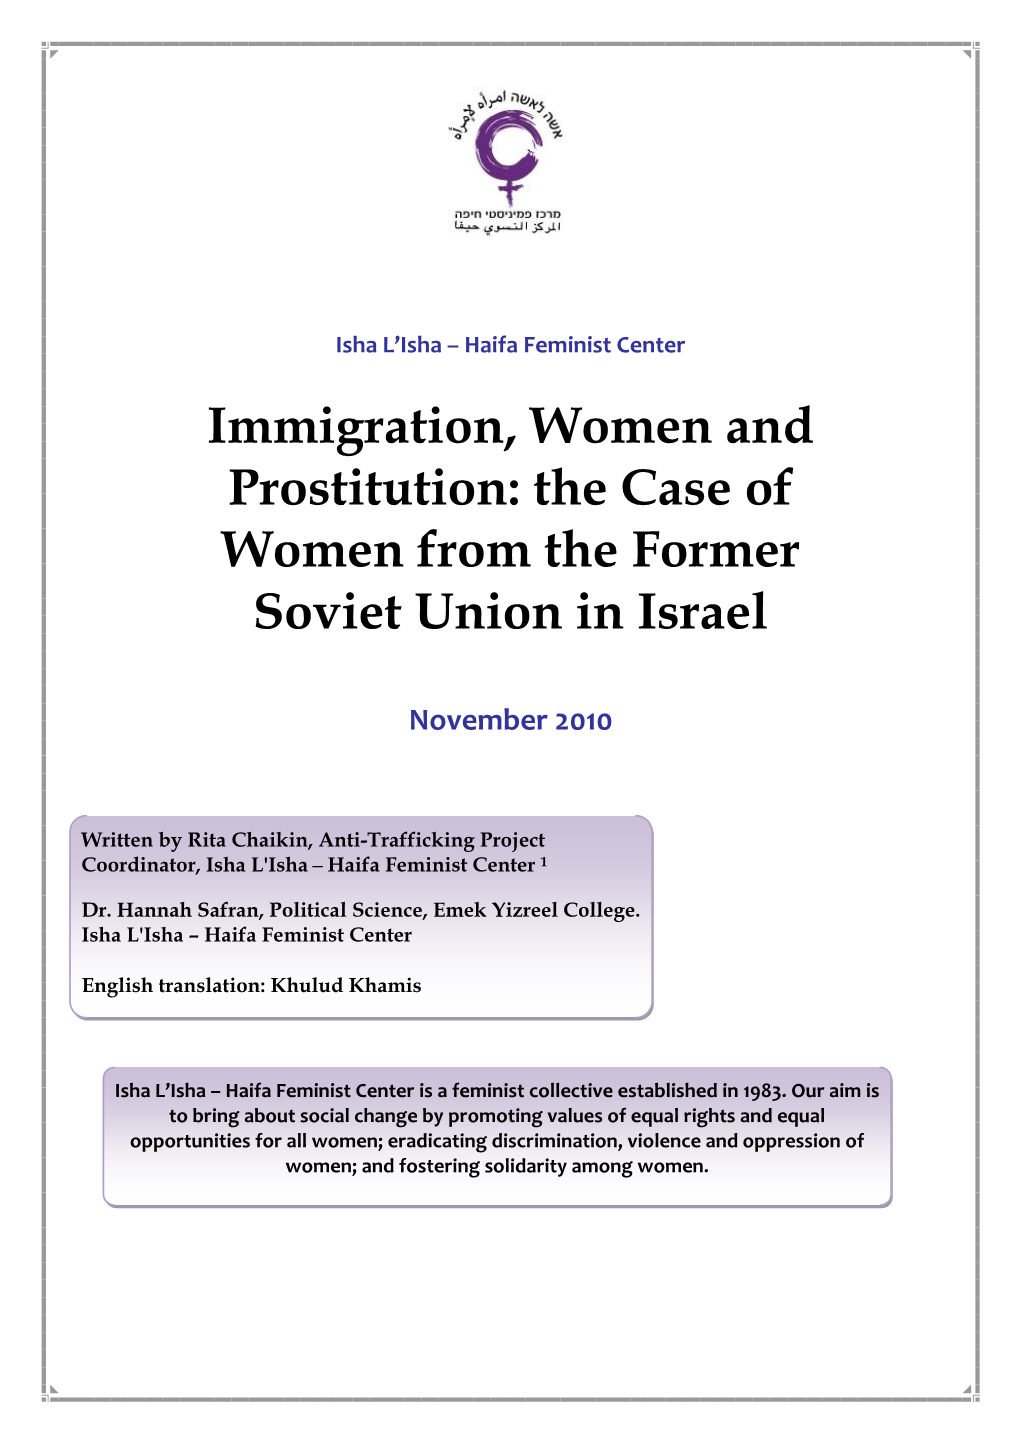 Immigration, Women and Prostitution: the Case of Women from the Former Soviet Union in Israel